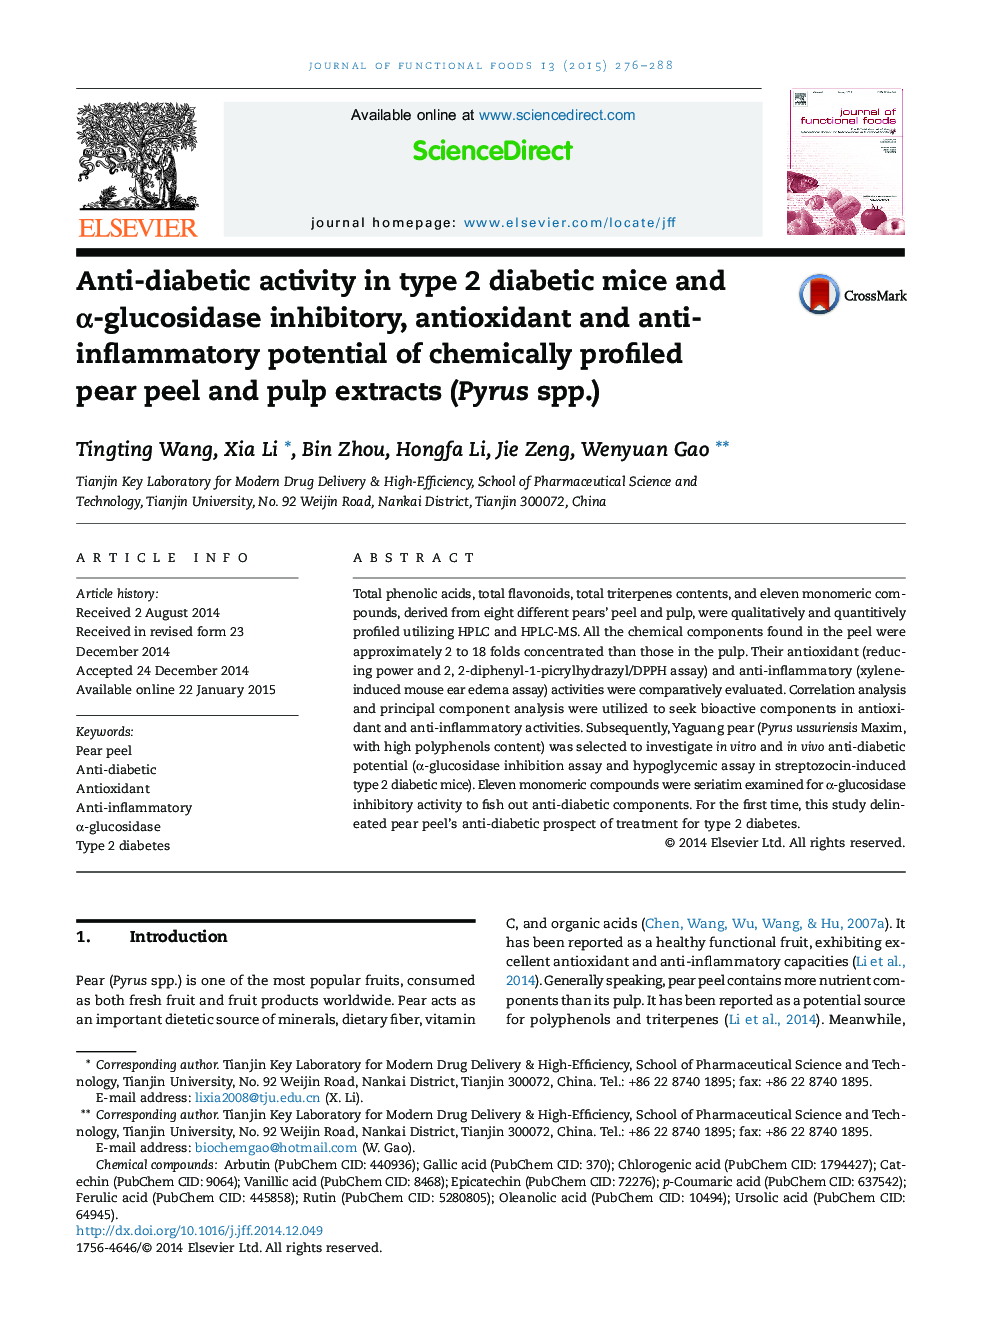 Anti-diabetic activity in type 2 diabetic mice and α-glucosidase inhibitory, antioxidant and anti-inflammatory potential of chemically profiled pear peel and pulp extracts (Pyrus spp.)